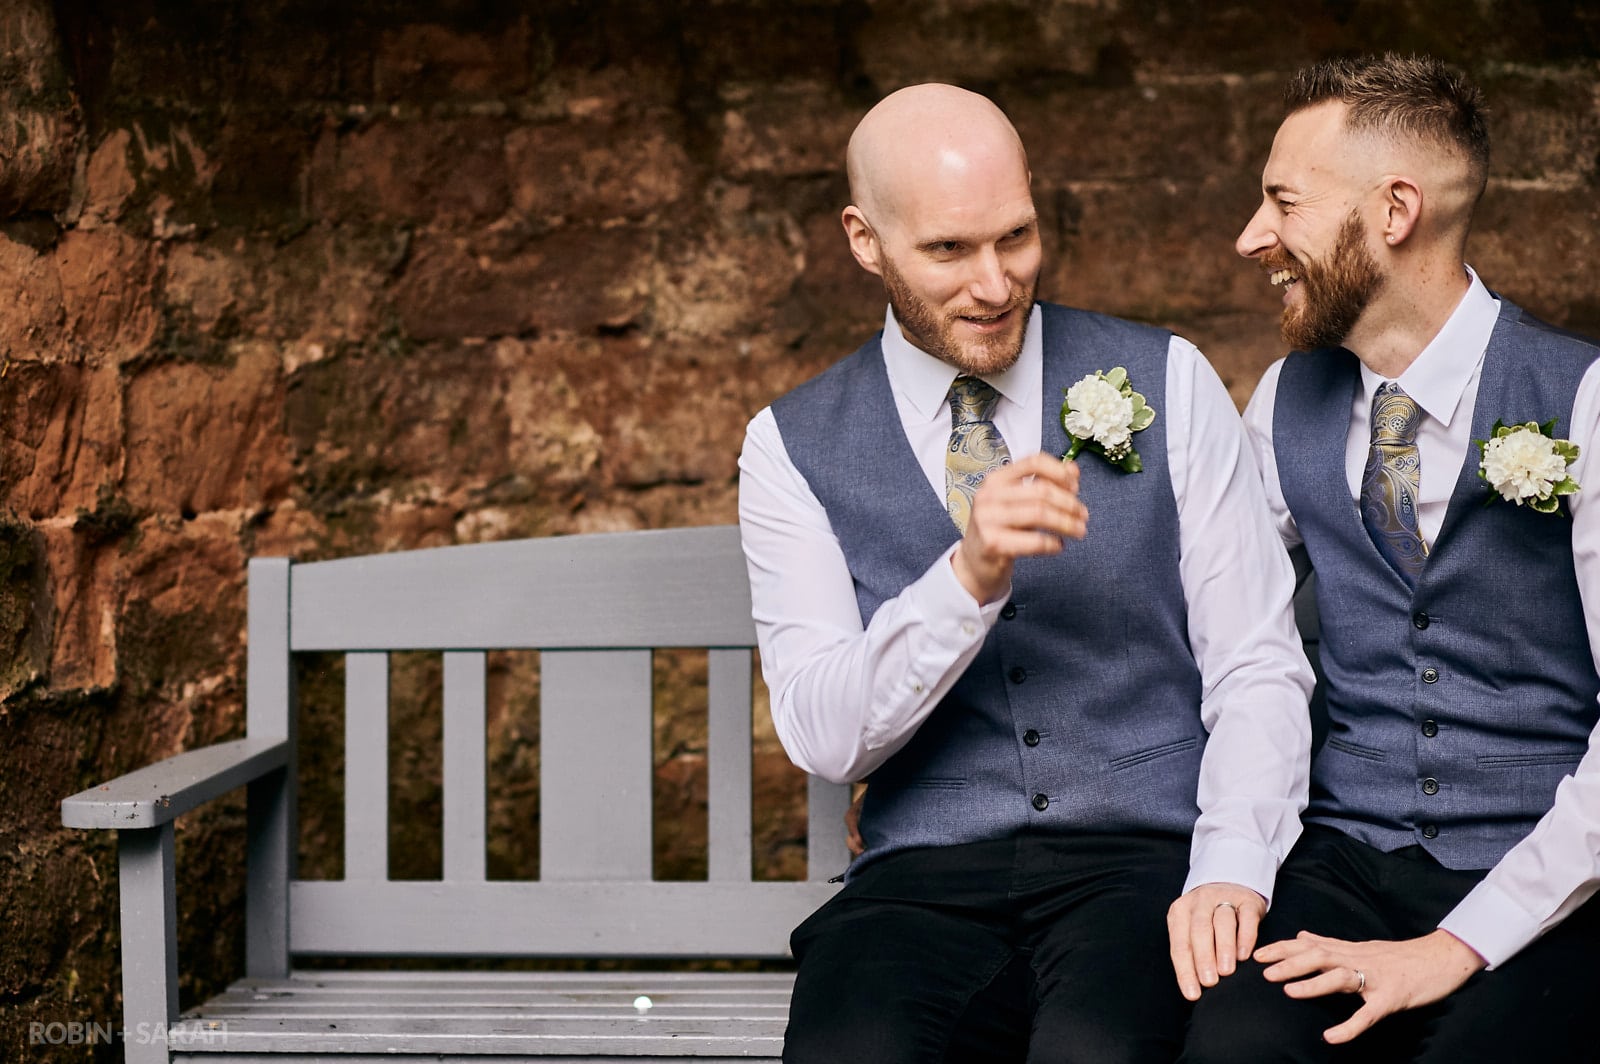 Two grooms laughing as they sit together on bench